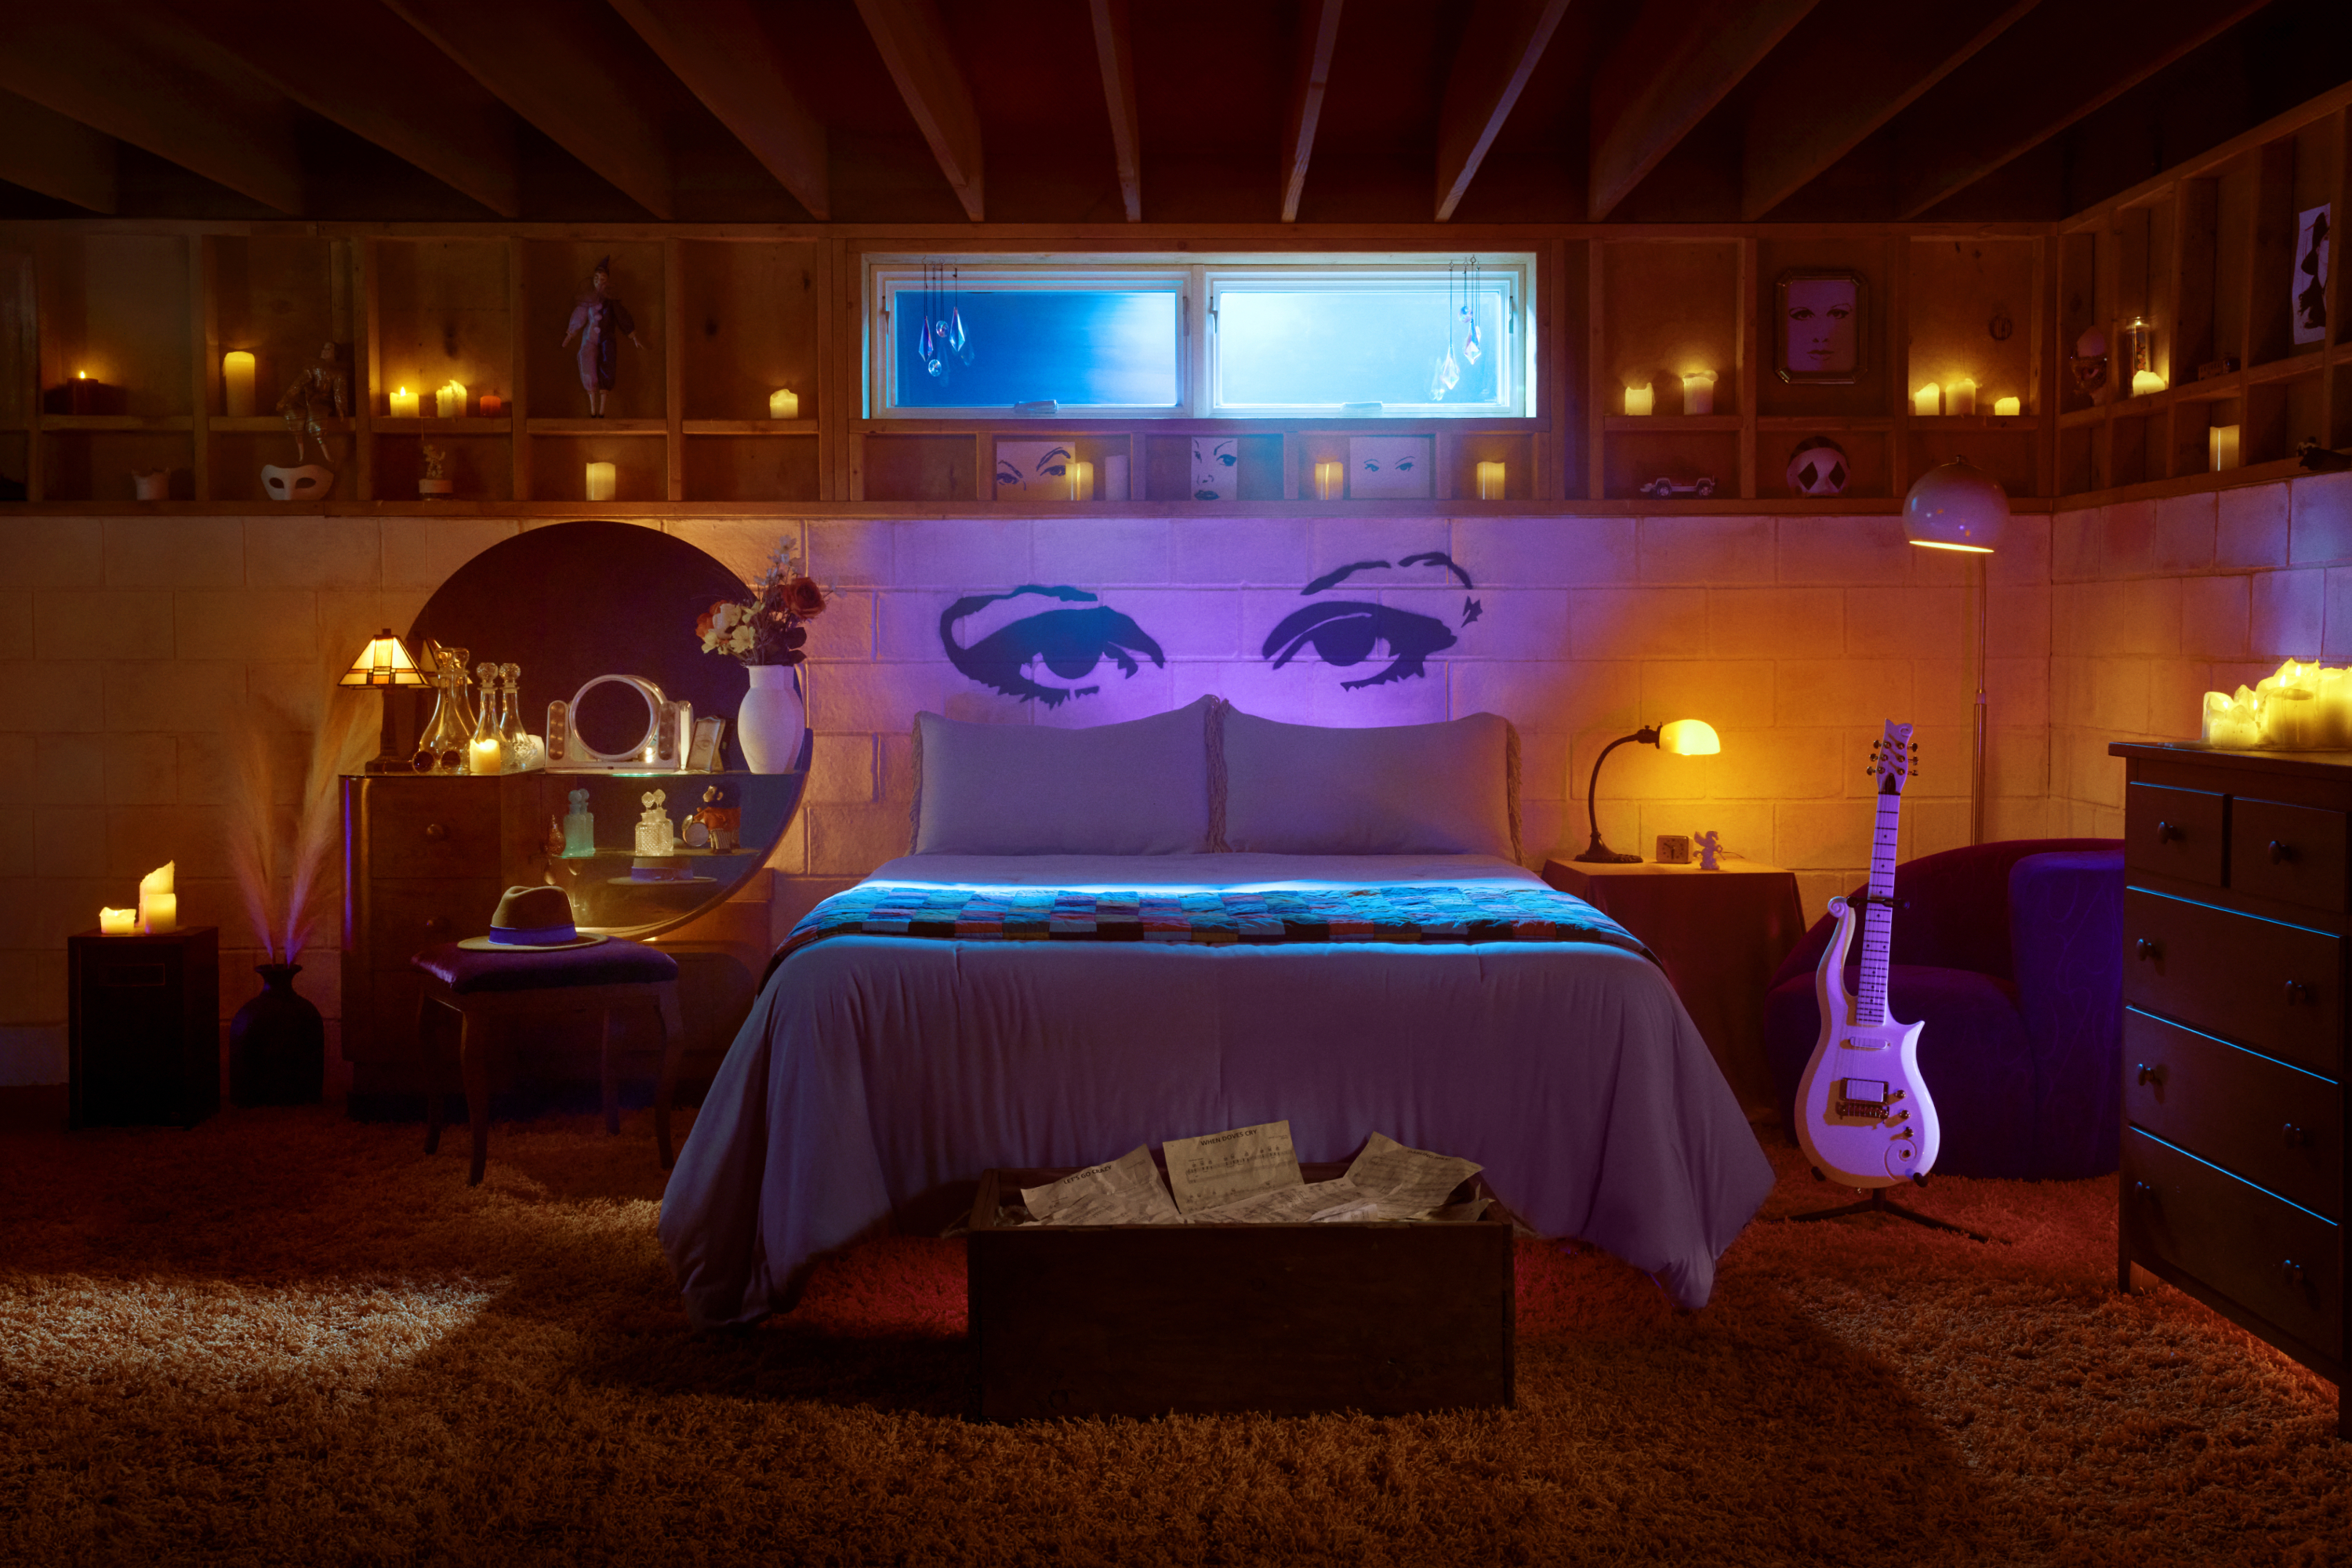 Bedroom with an iconic pop art portrait above the bed, electric guitar by the side, and ambient lighting